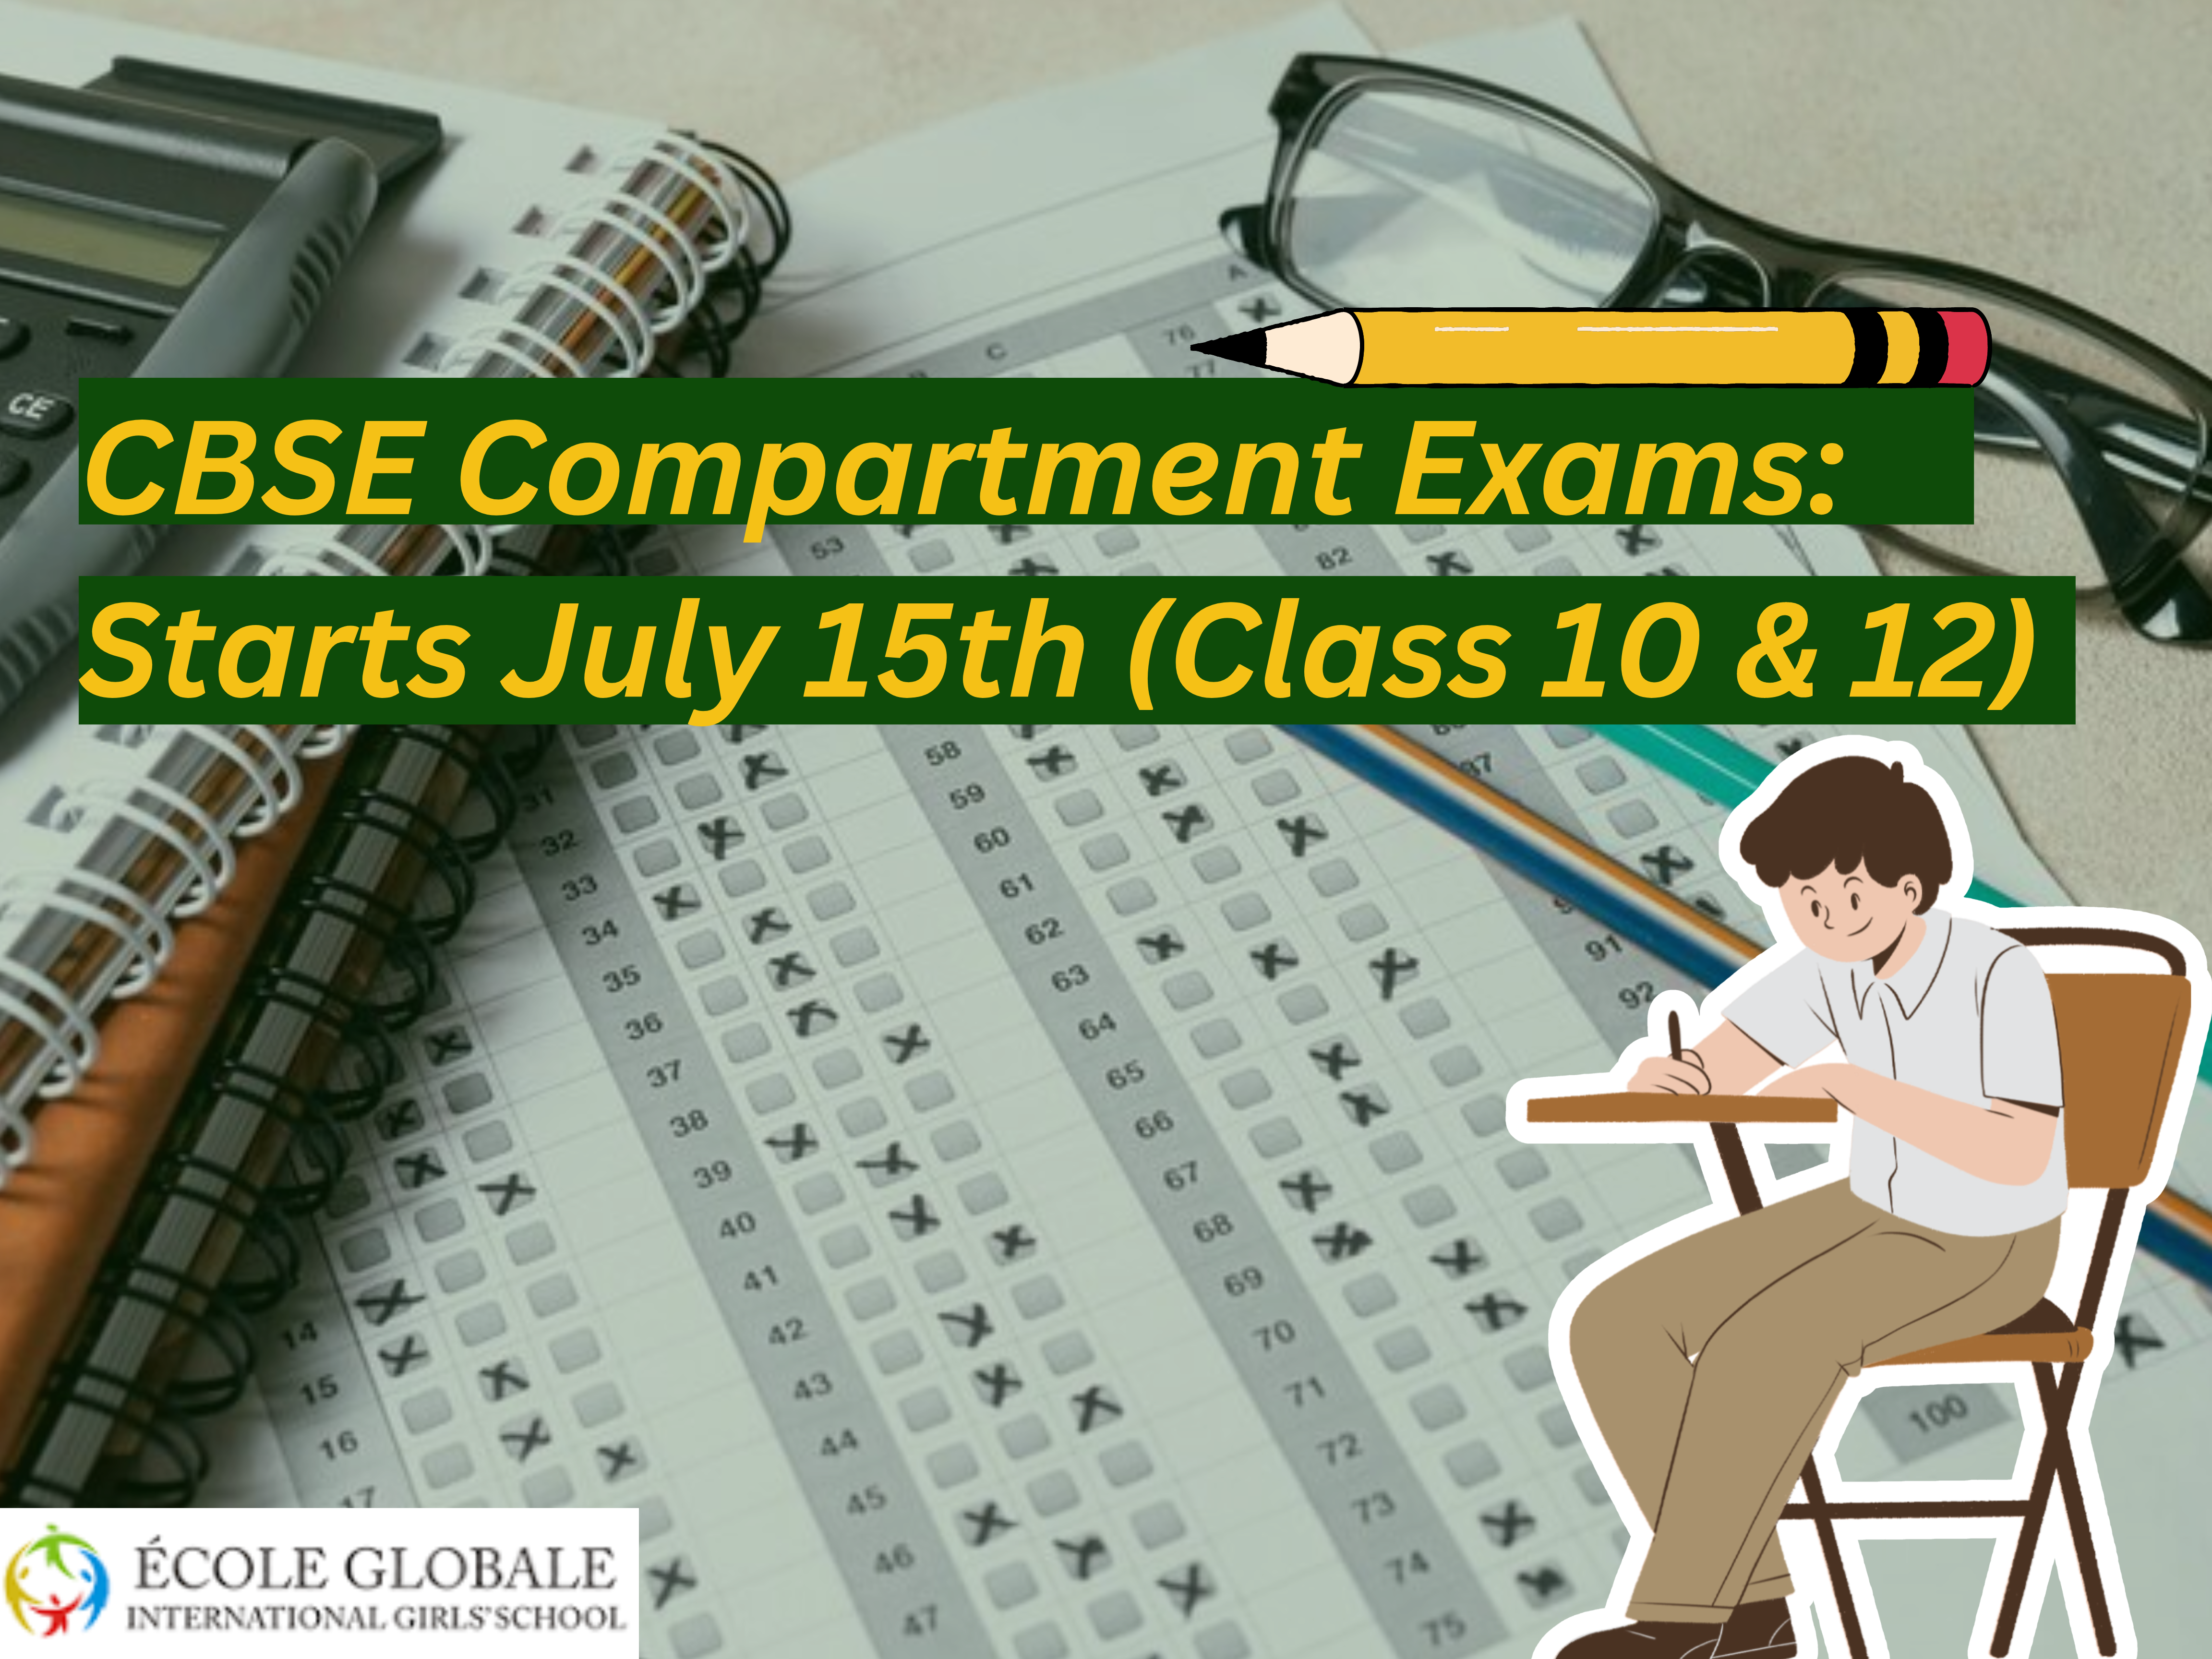 You are currently viewing CBSE Compartment Exams: Starts July 15th (Class 10 & 12)